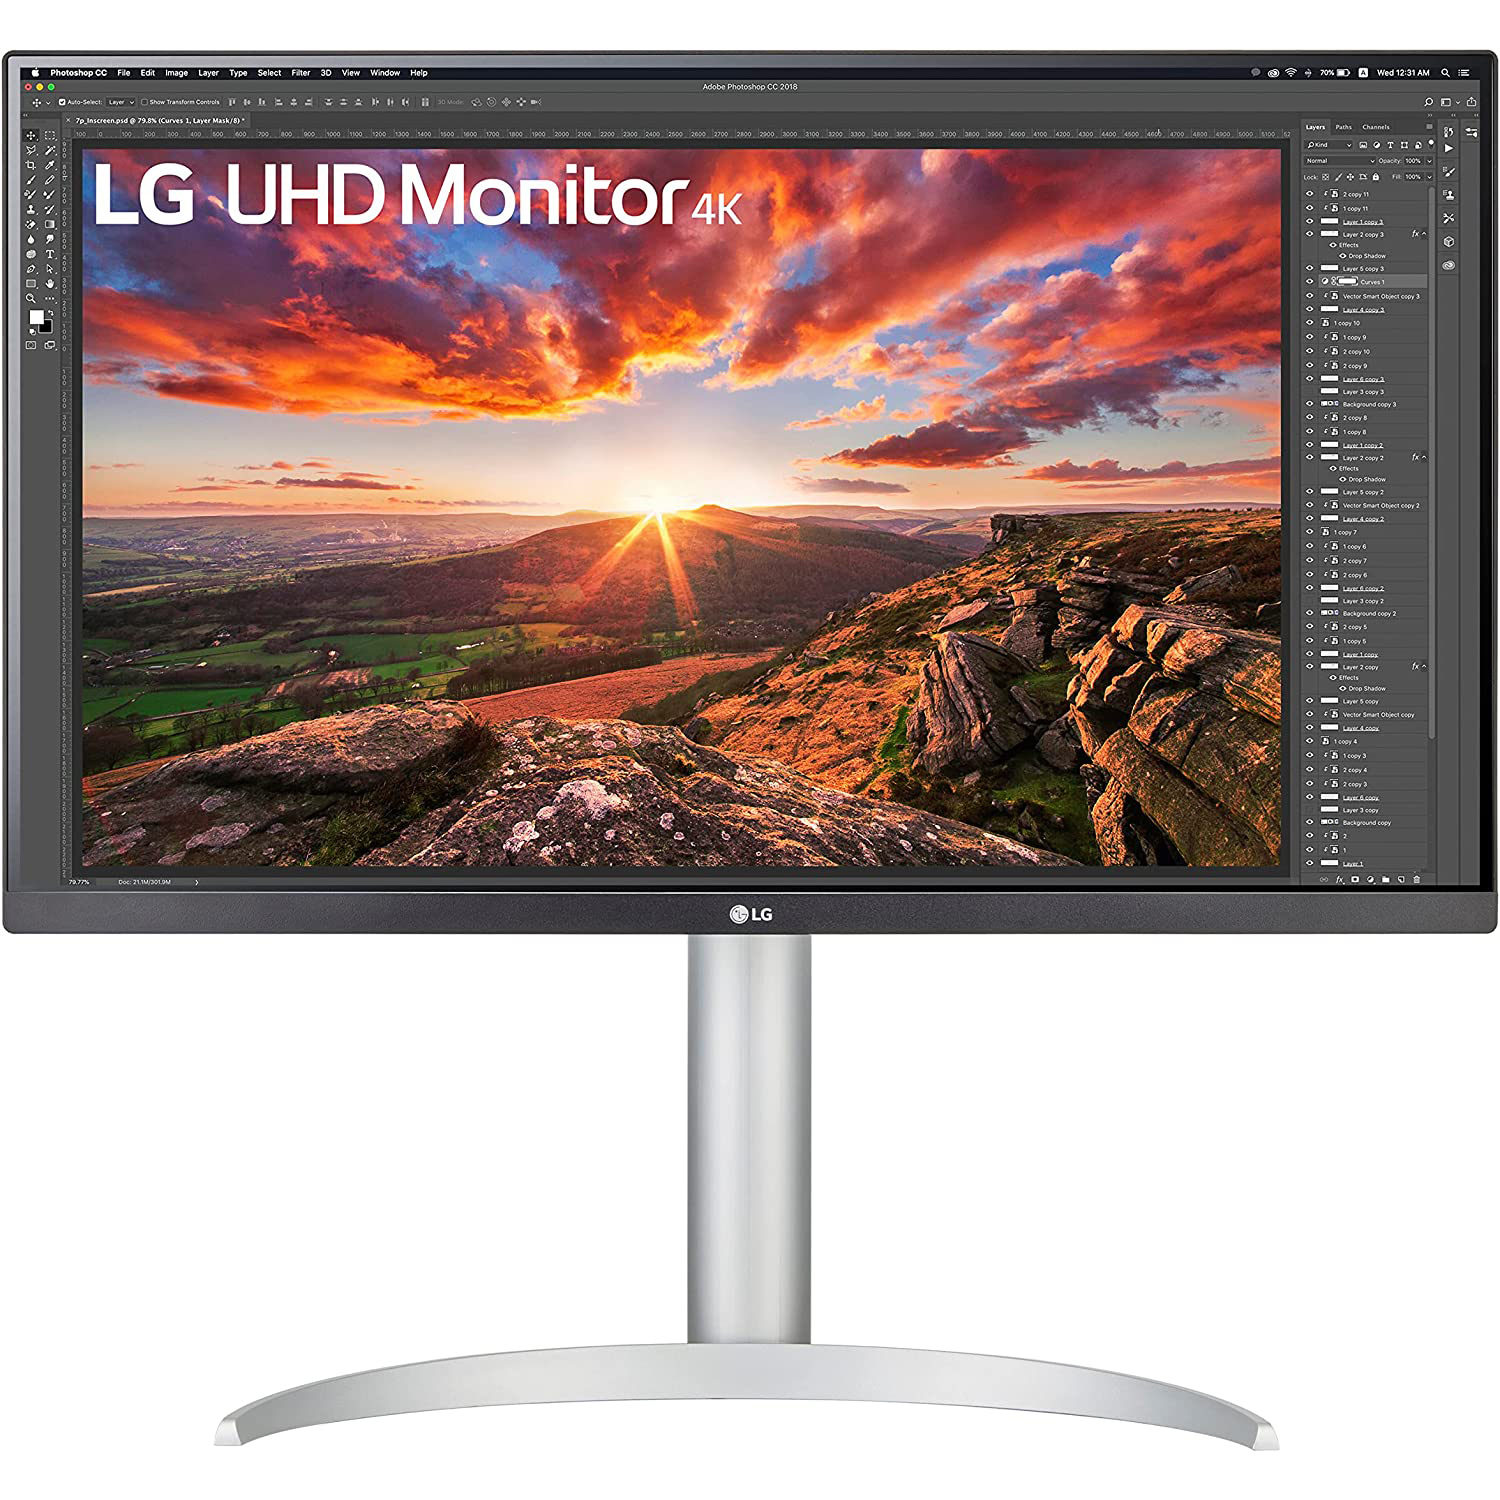 27” LG 27UP650-W 3840x2160 IPS 4K HDR 400 Monitor $199 + free s/h